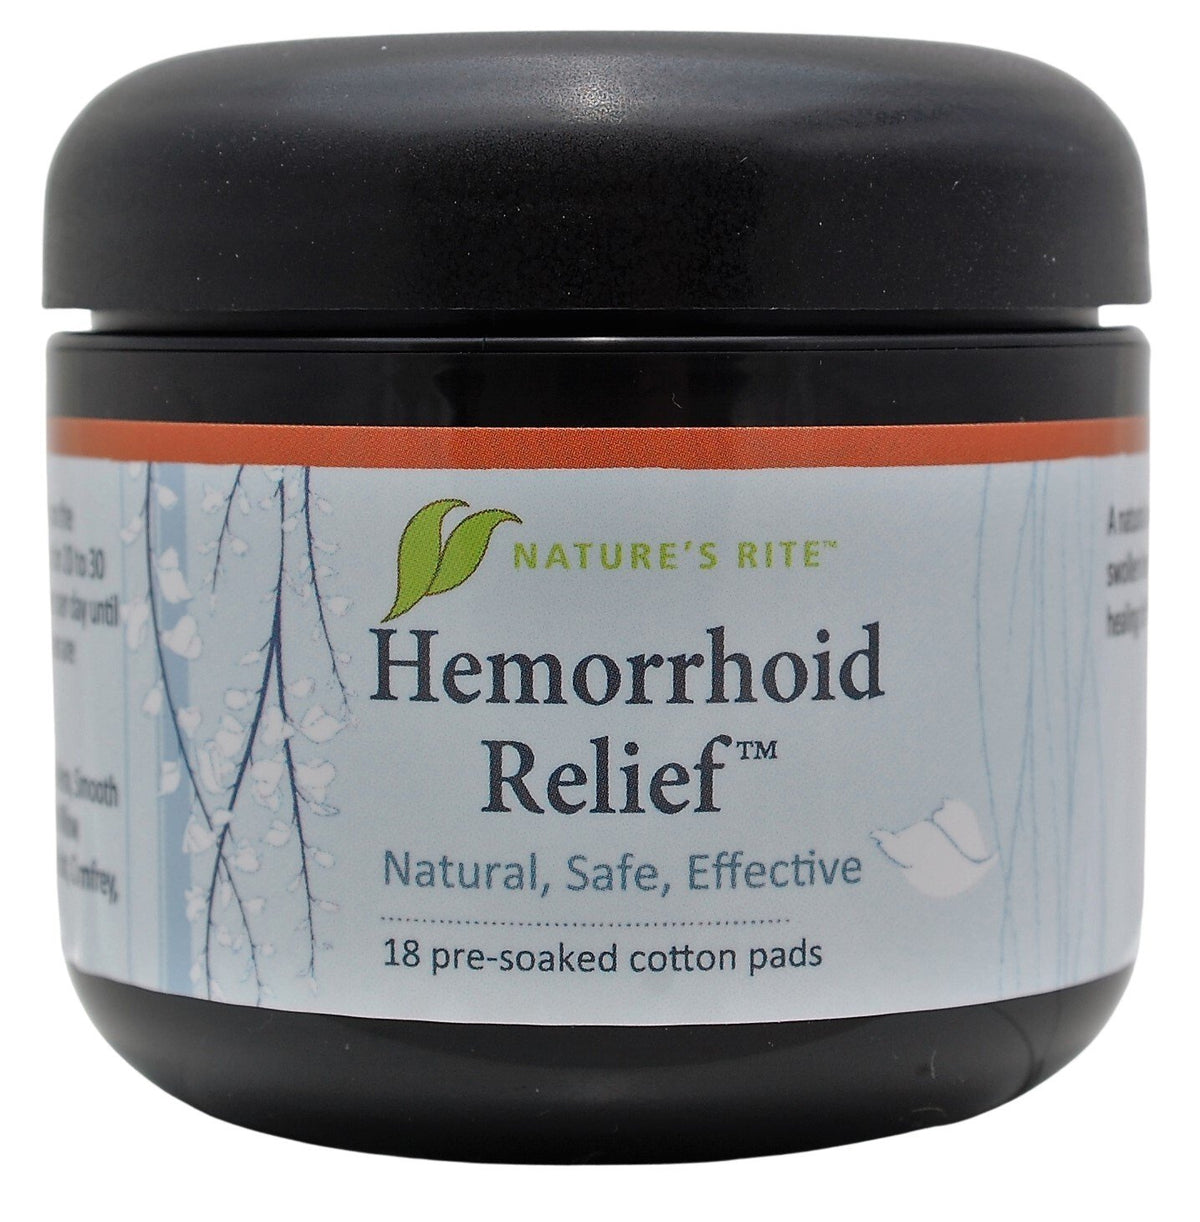 Natures Rite Hemorrhoid Relief 18 pre-soaked cotton Container